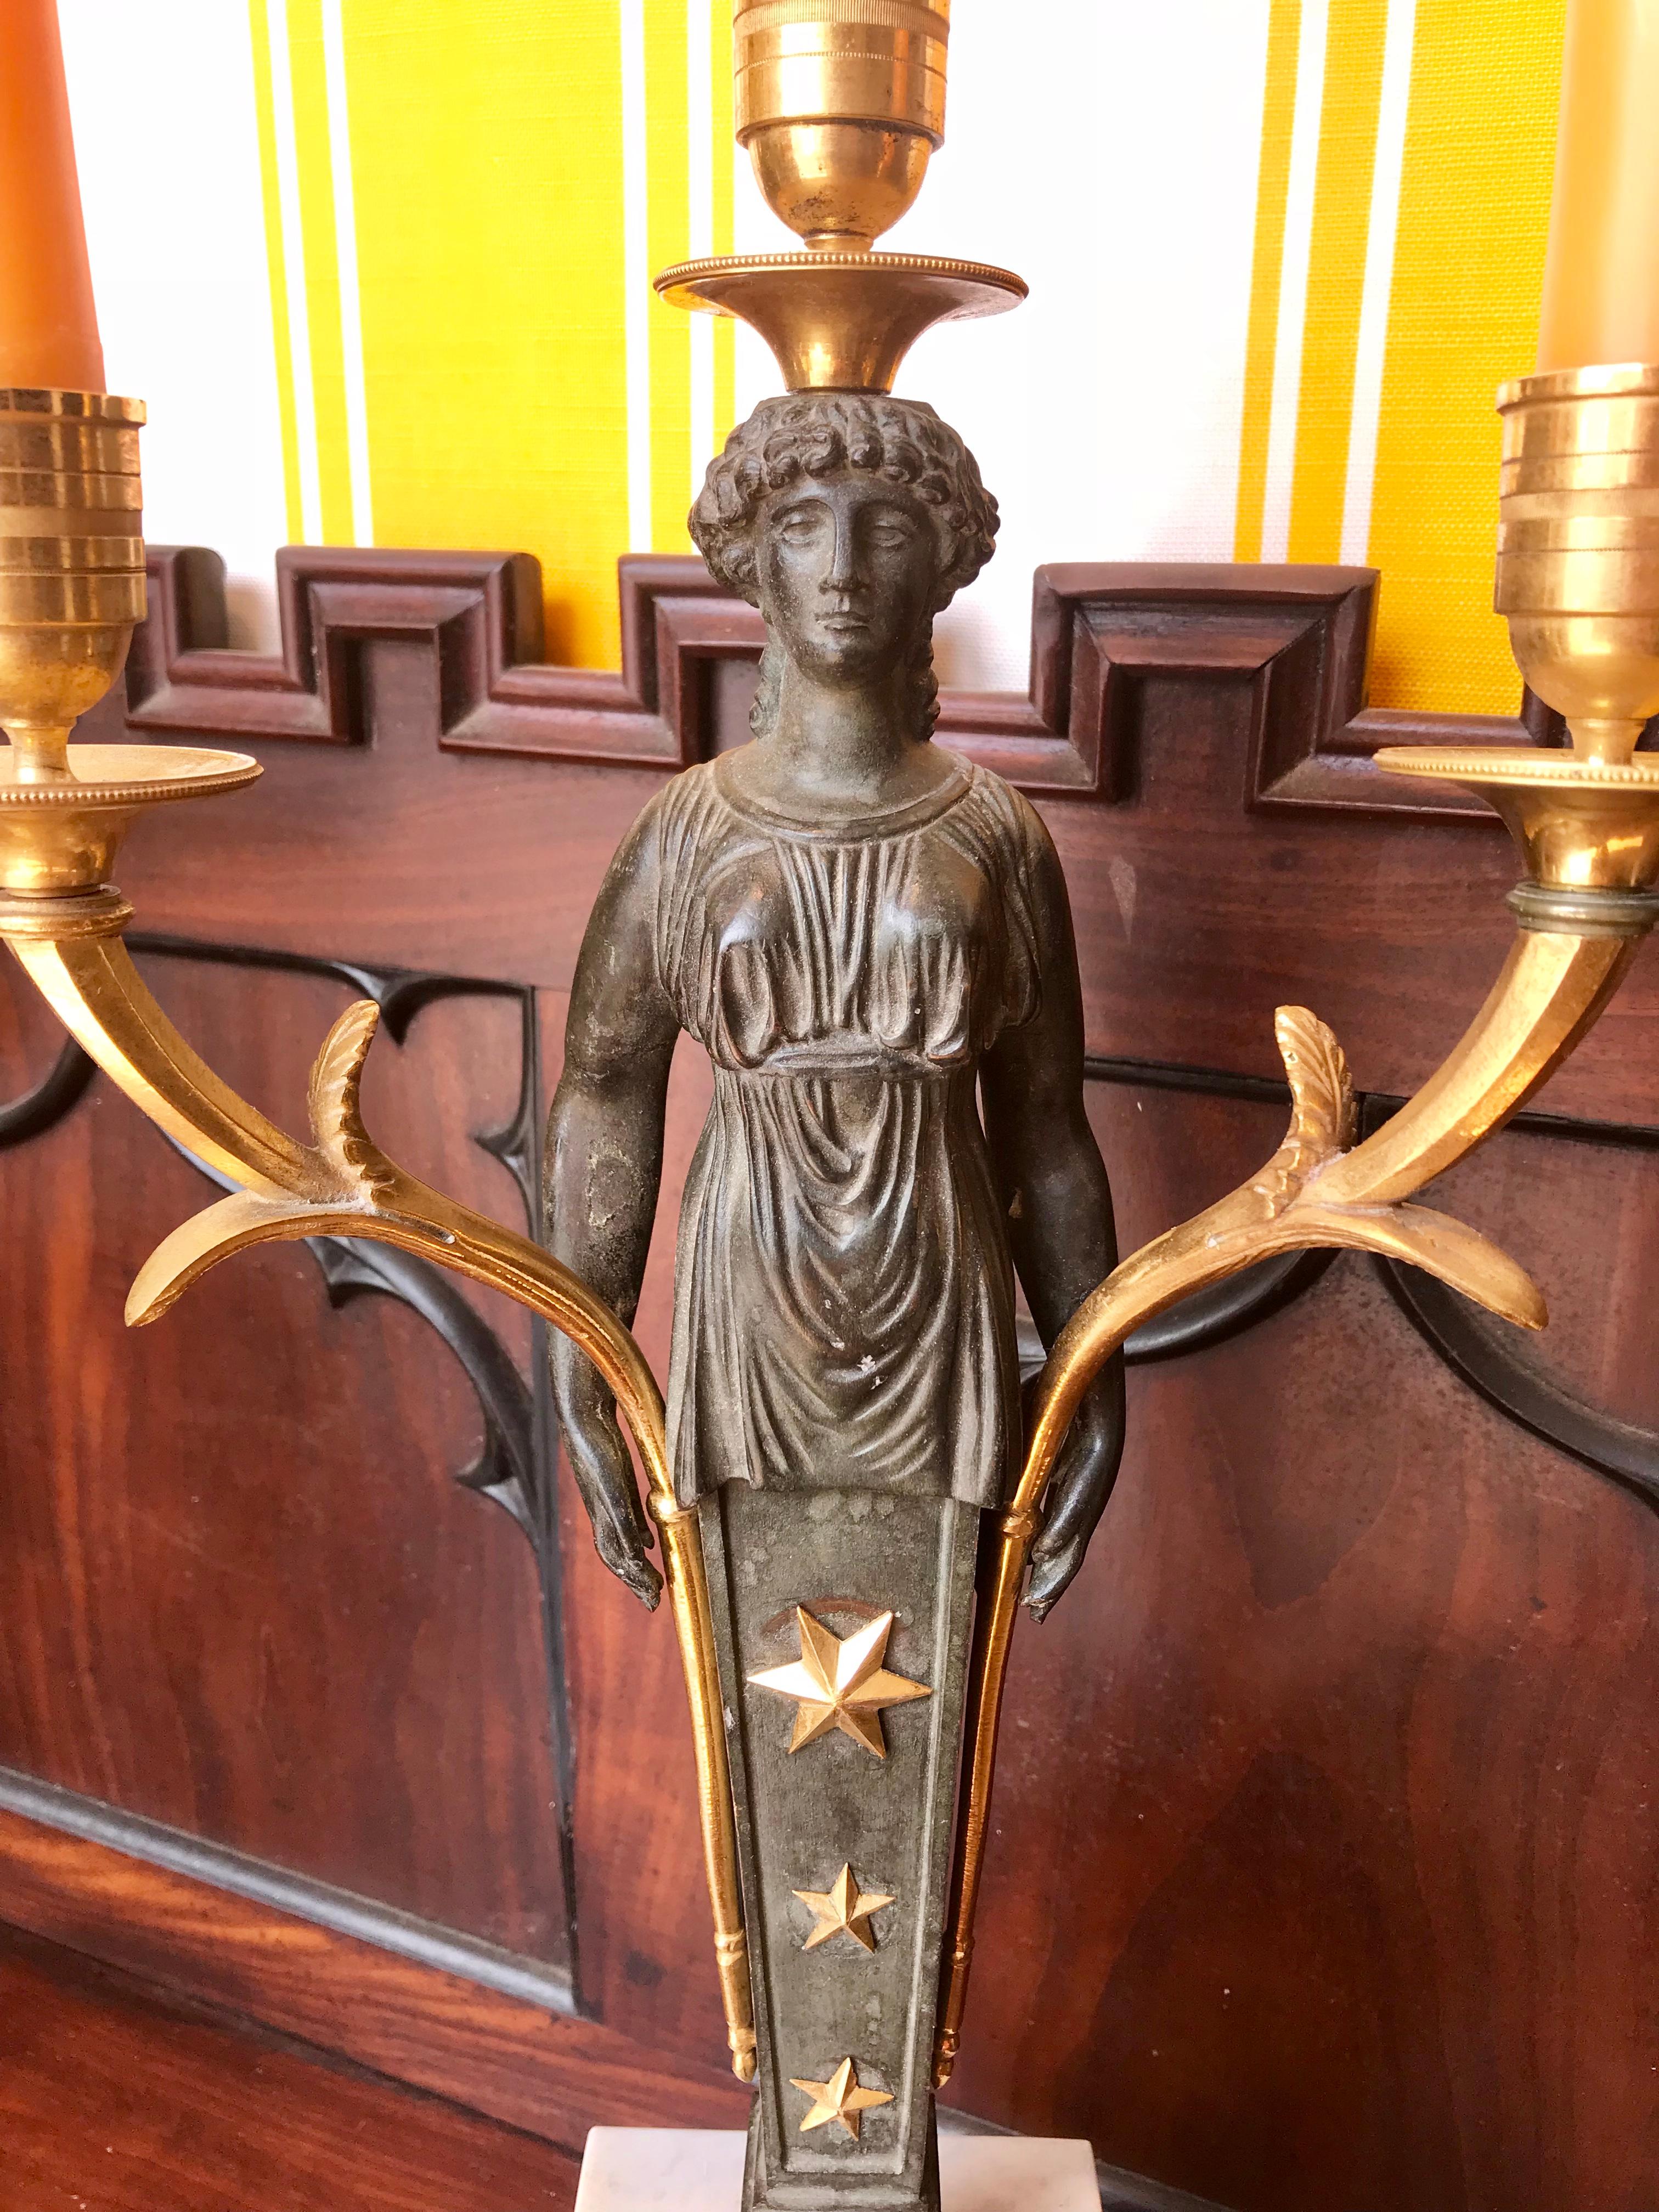 Pair of late 19th century Empire bronze and ormolu candelabra.

- Caryatid herm female figures on marble block plinths.
- Three ormolu candle arms/cups
- Well modeled.